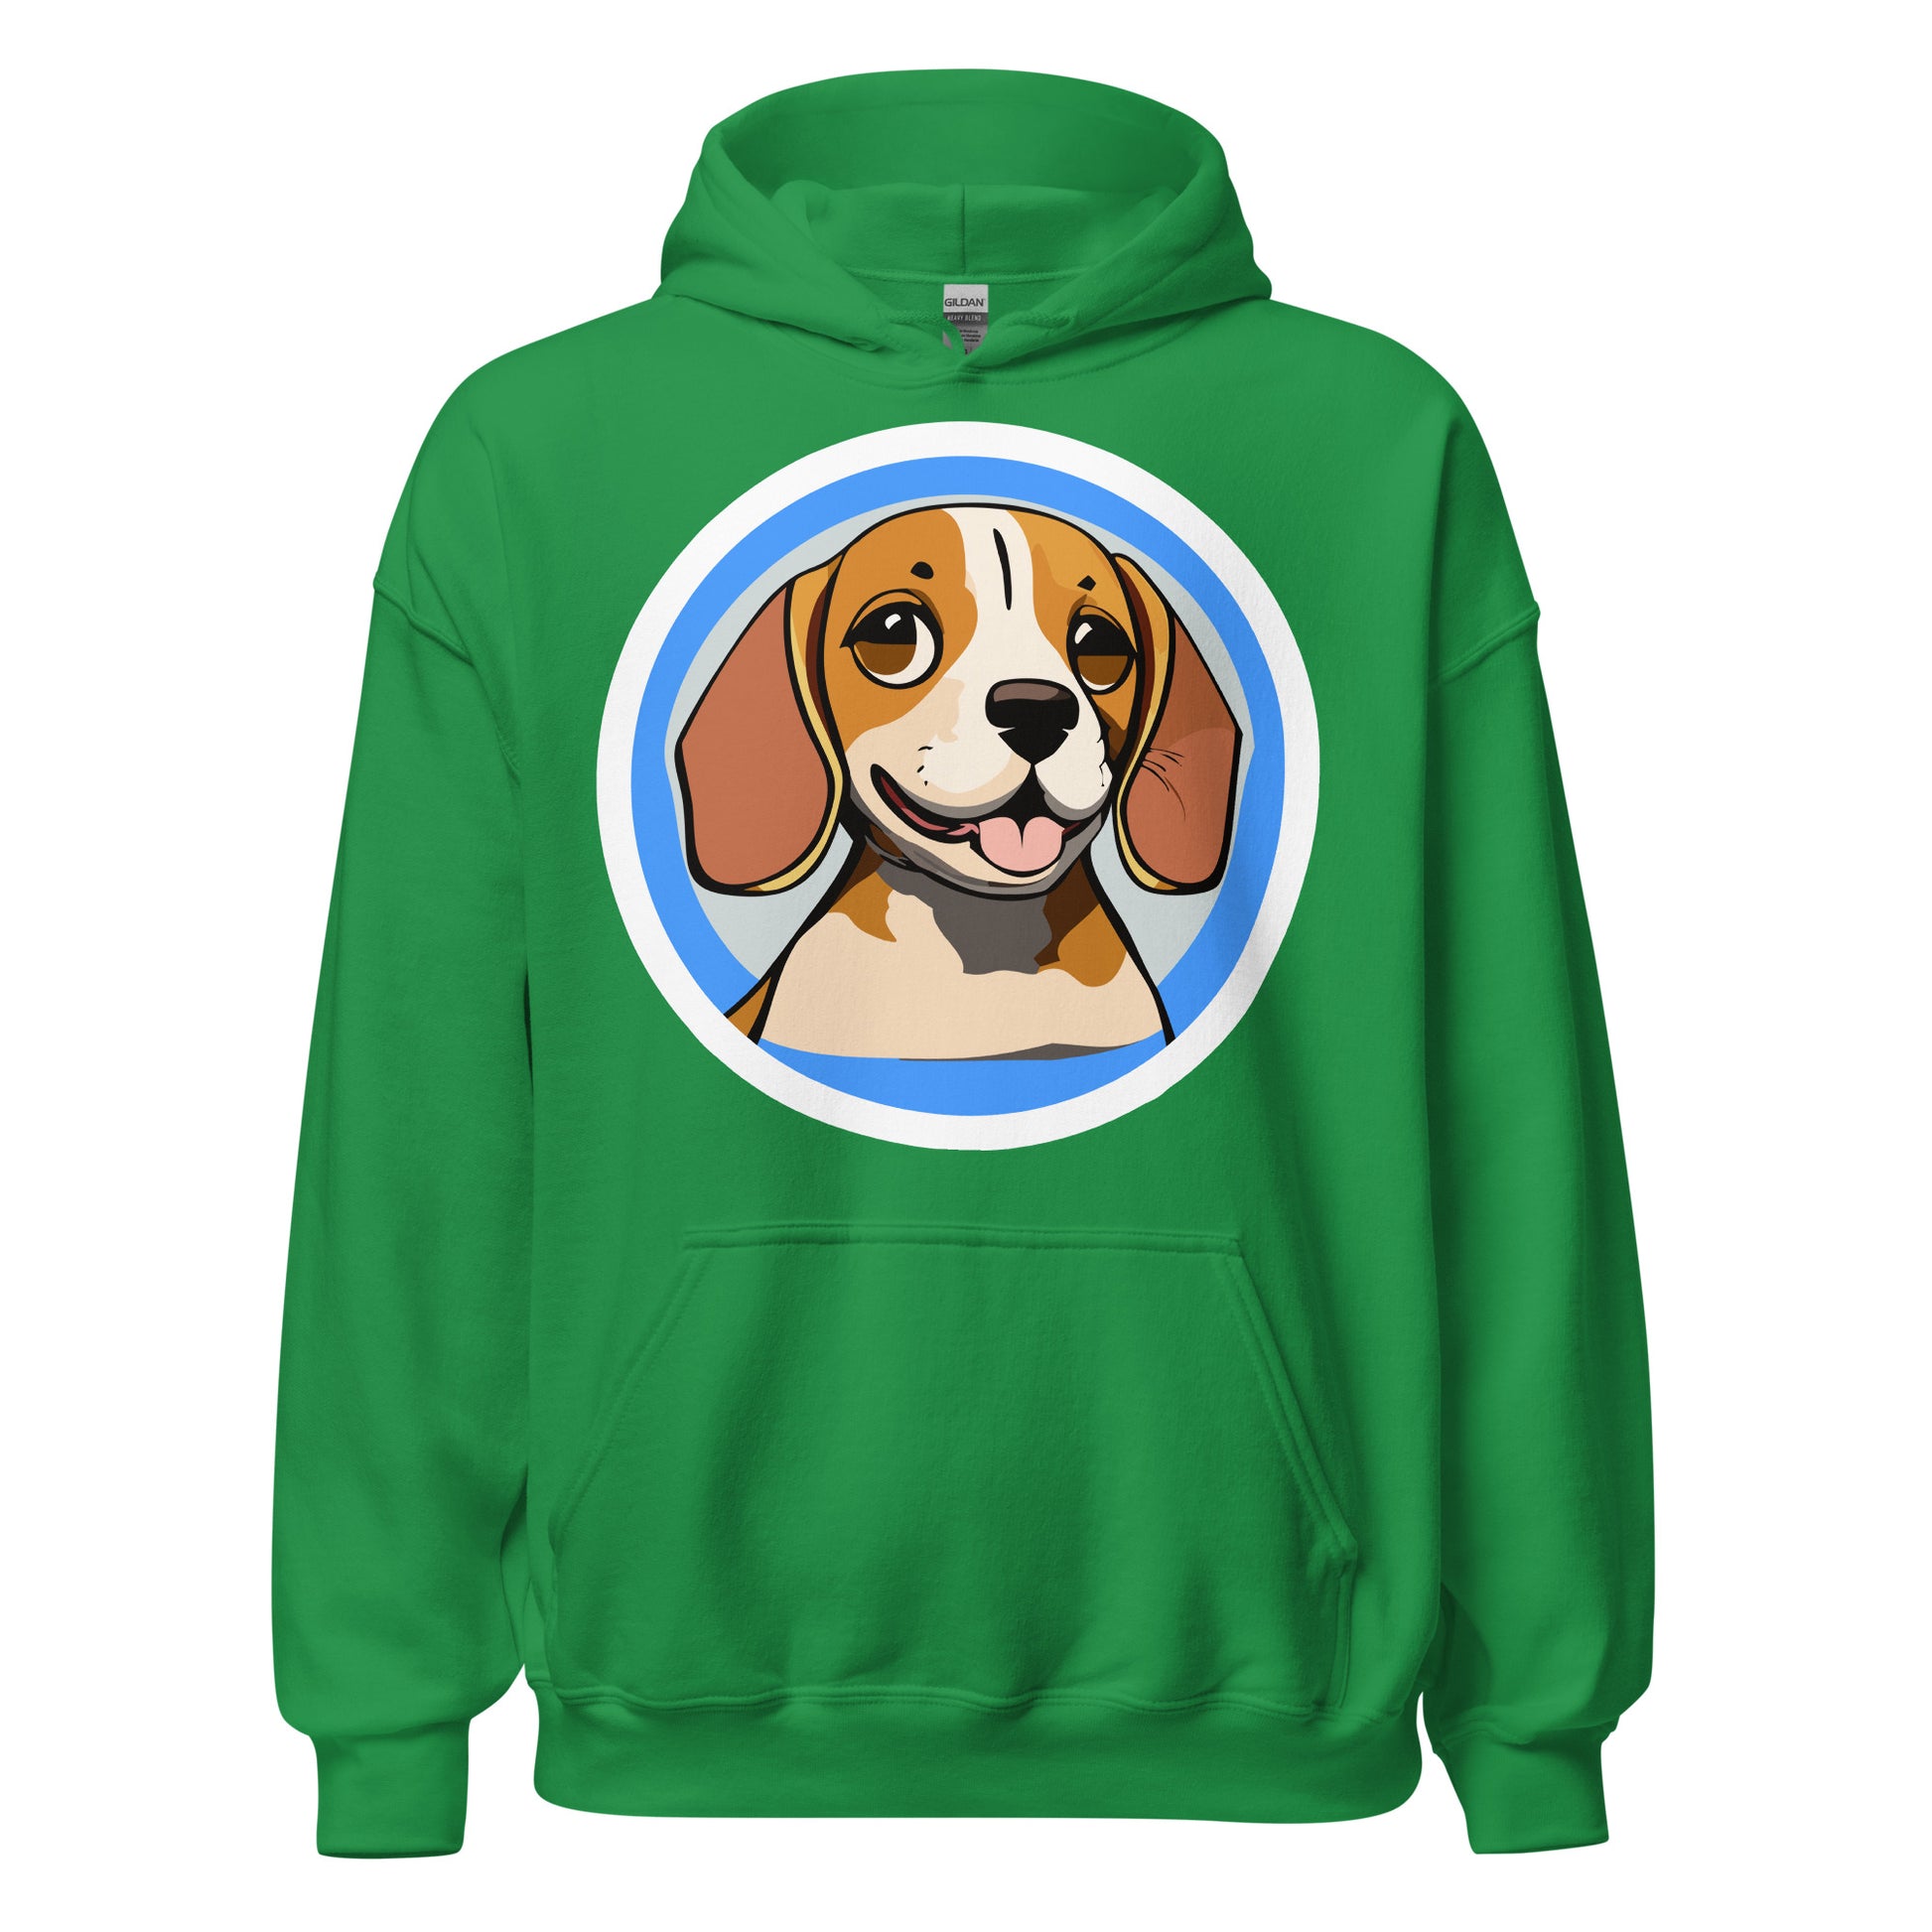 Comfy unisex hoodie for him or her with a cute beagle image, in irish green